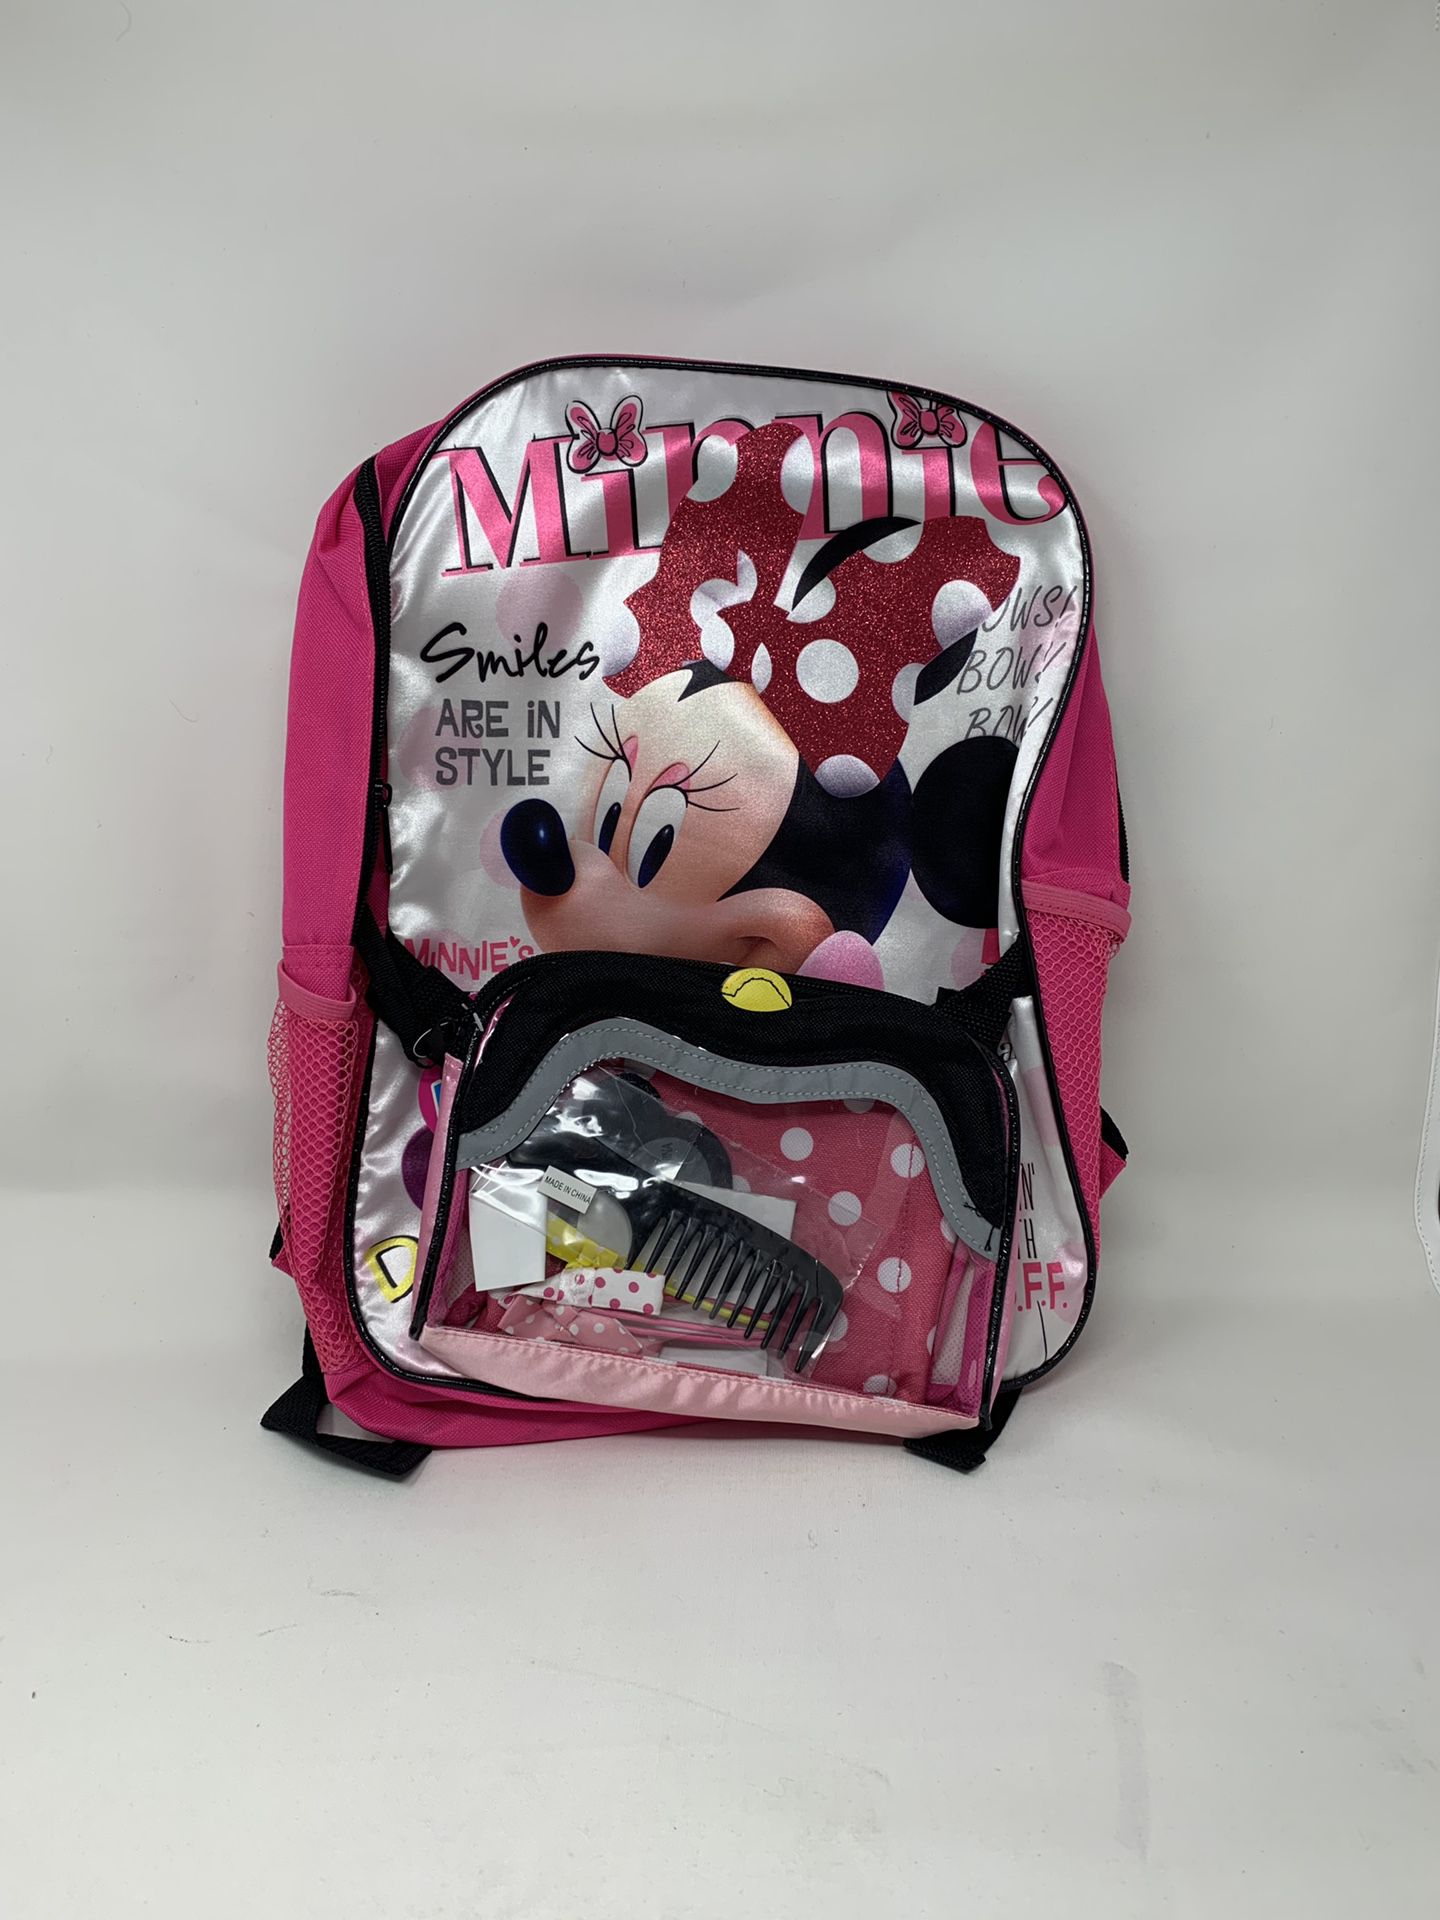 Minnie mouse backpack